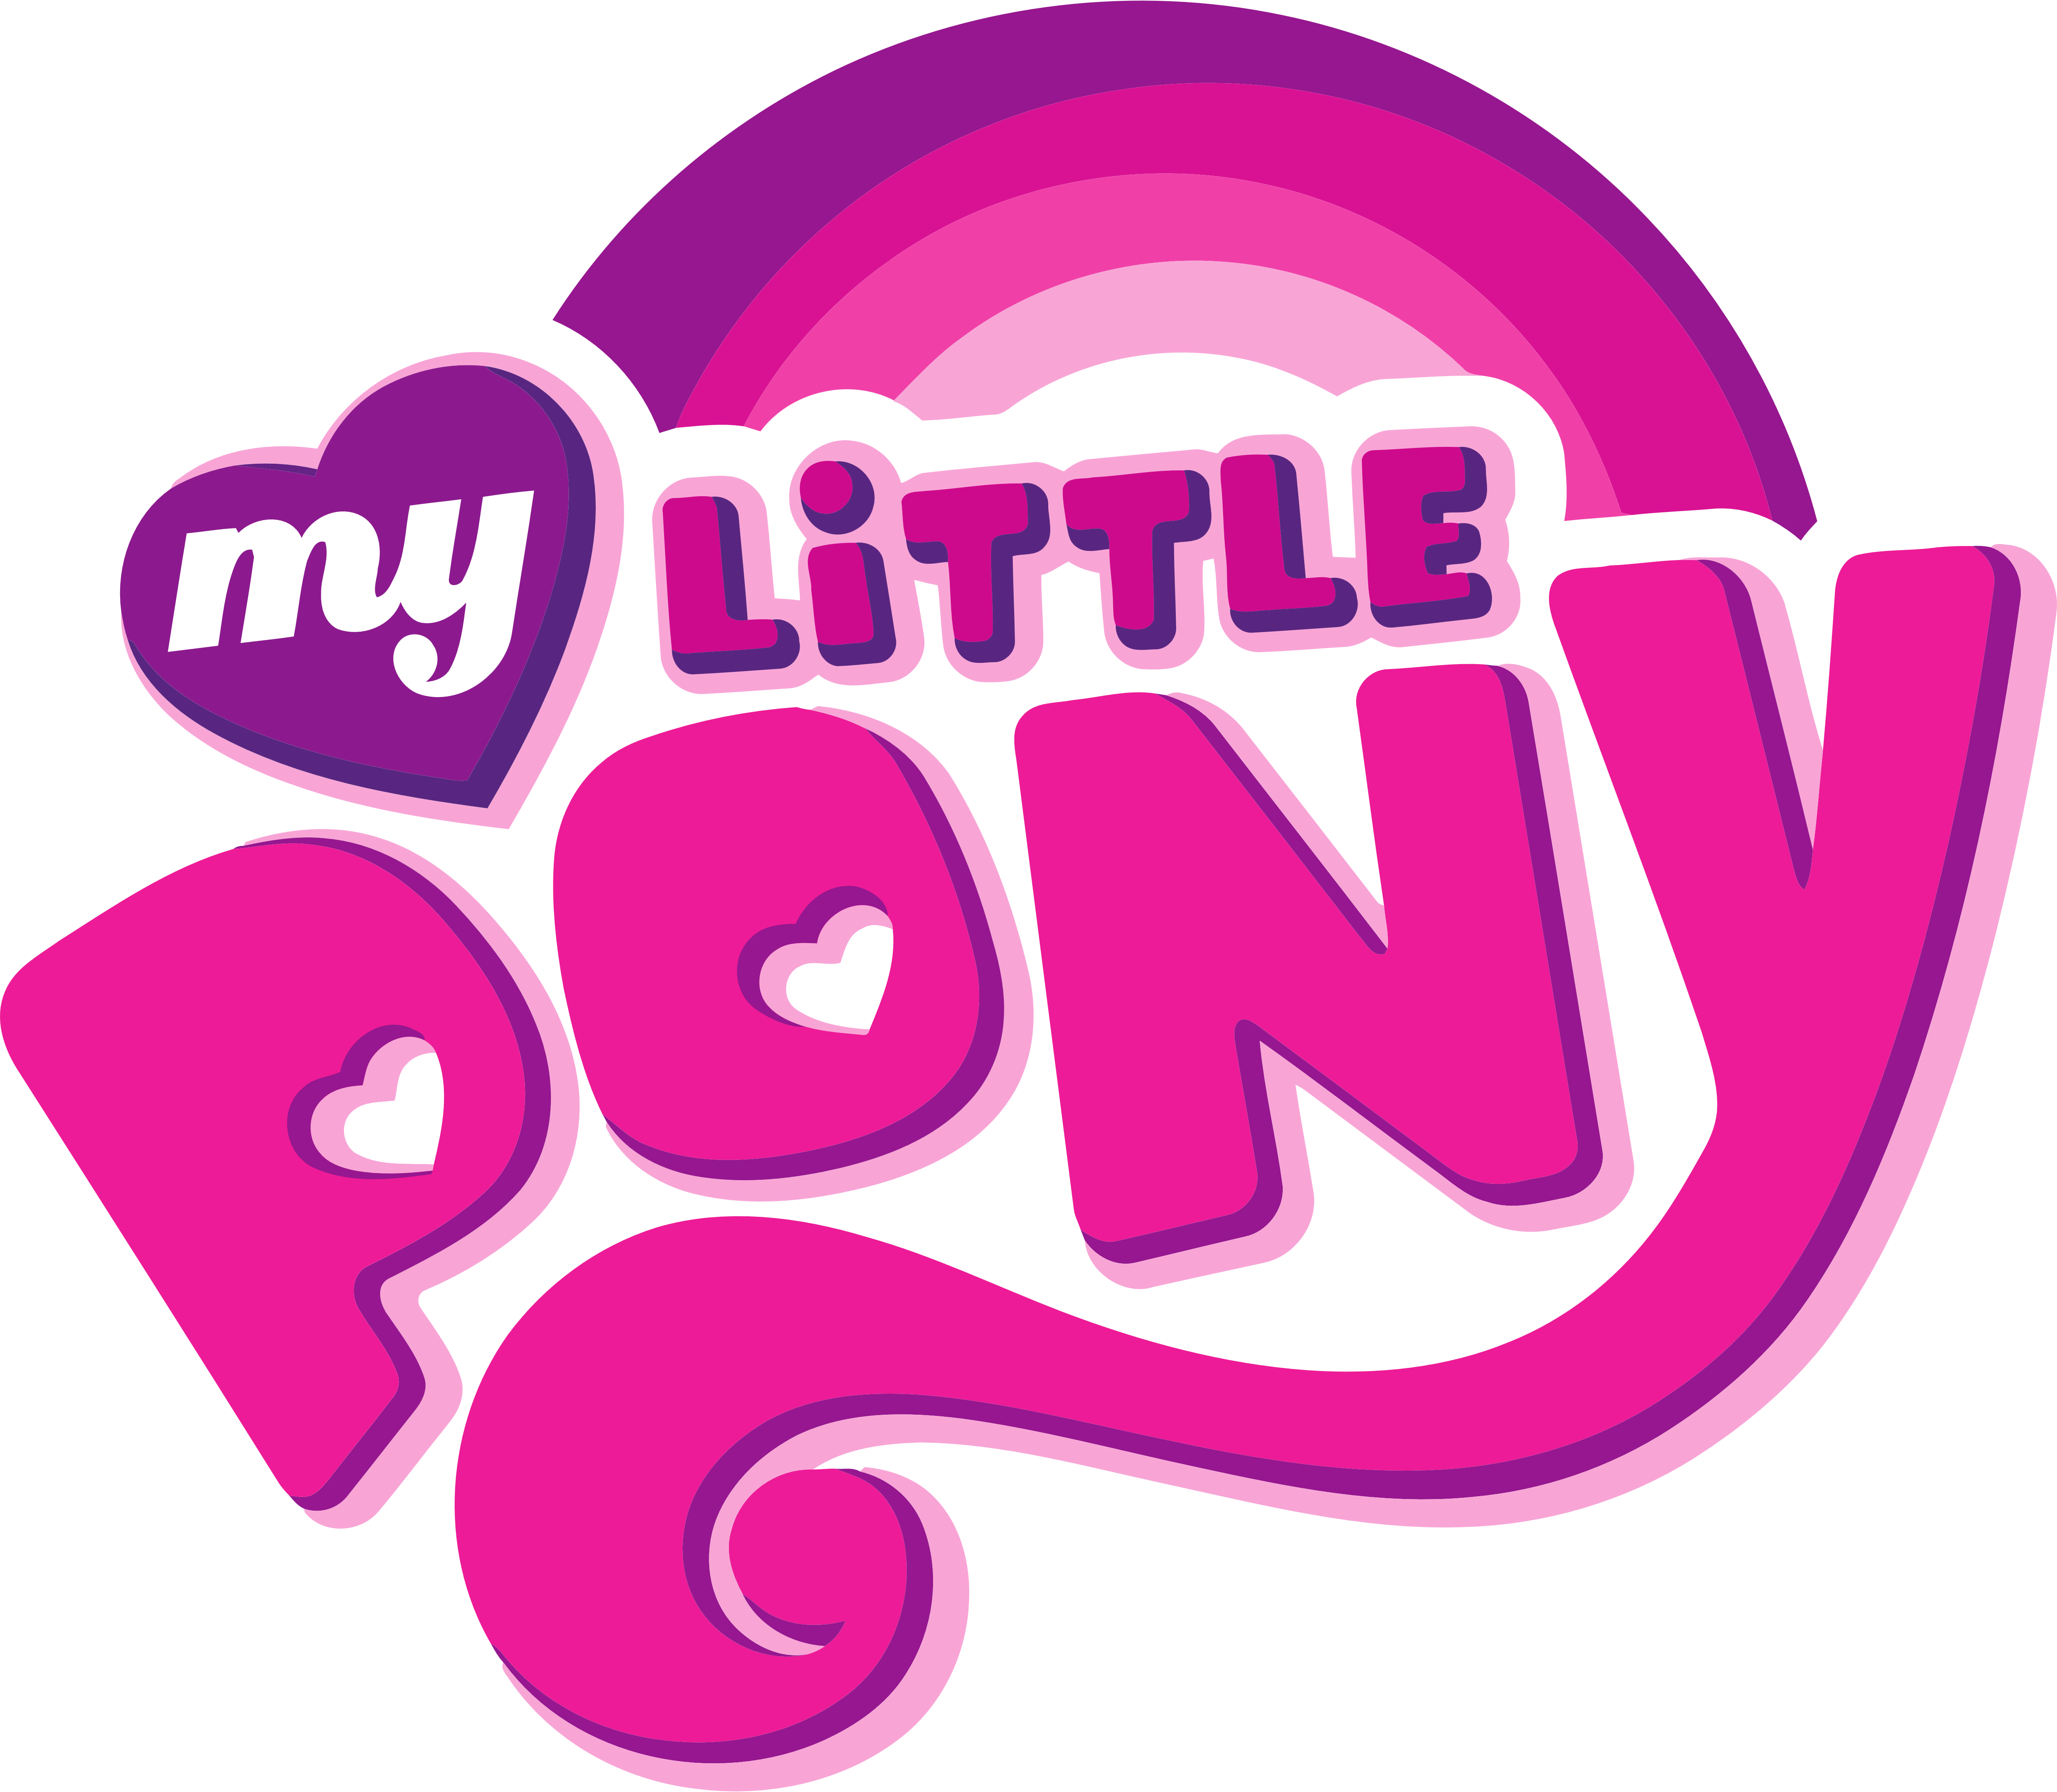 My Little Pony Friendship Is Magic Logos Download